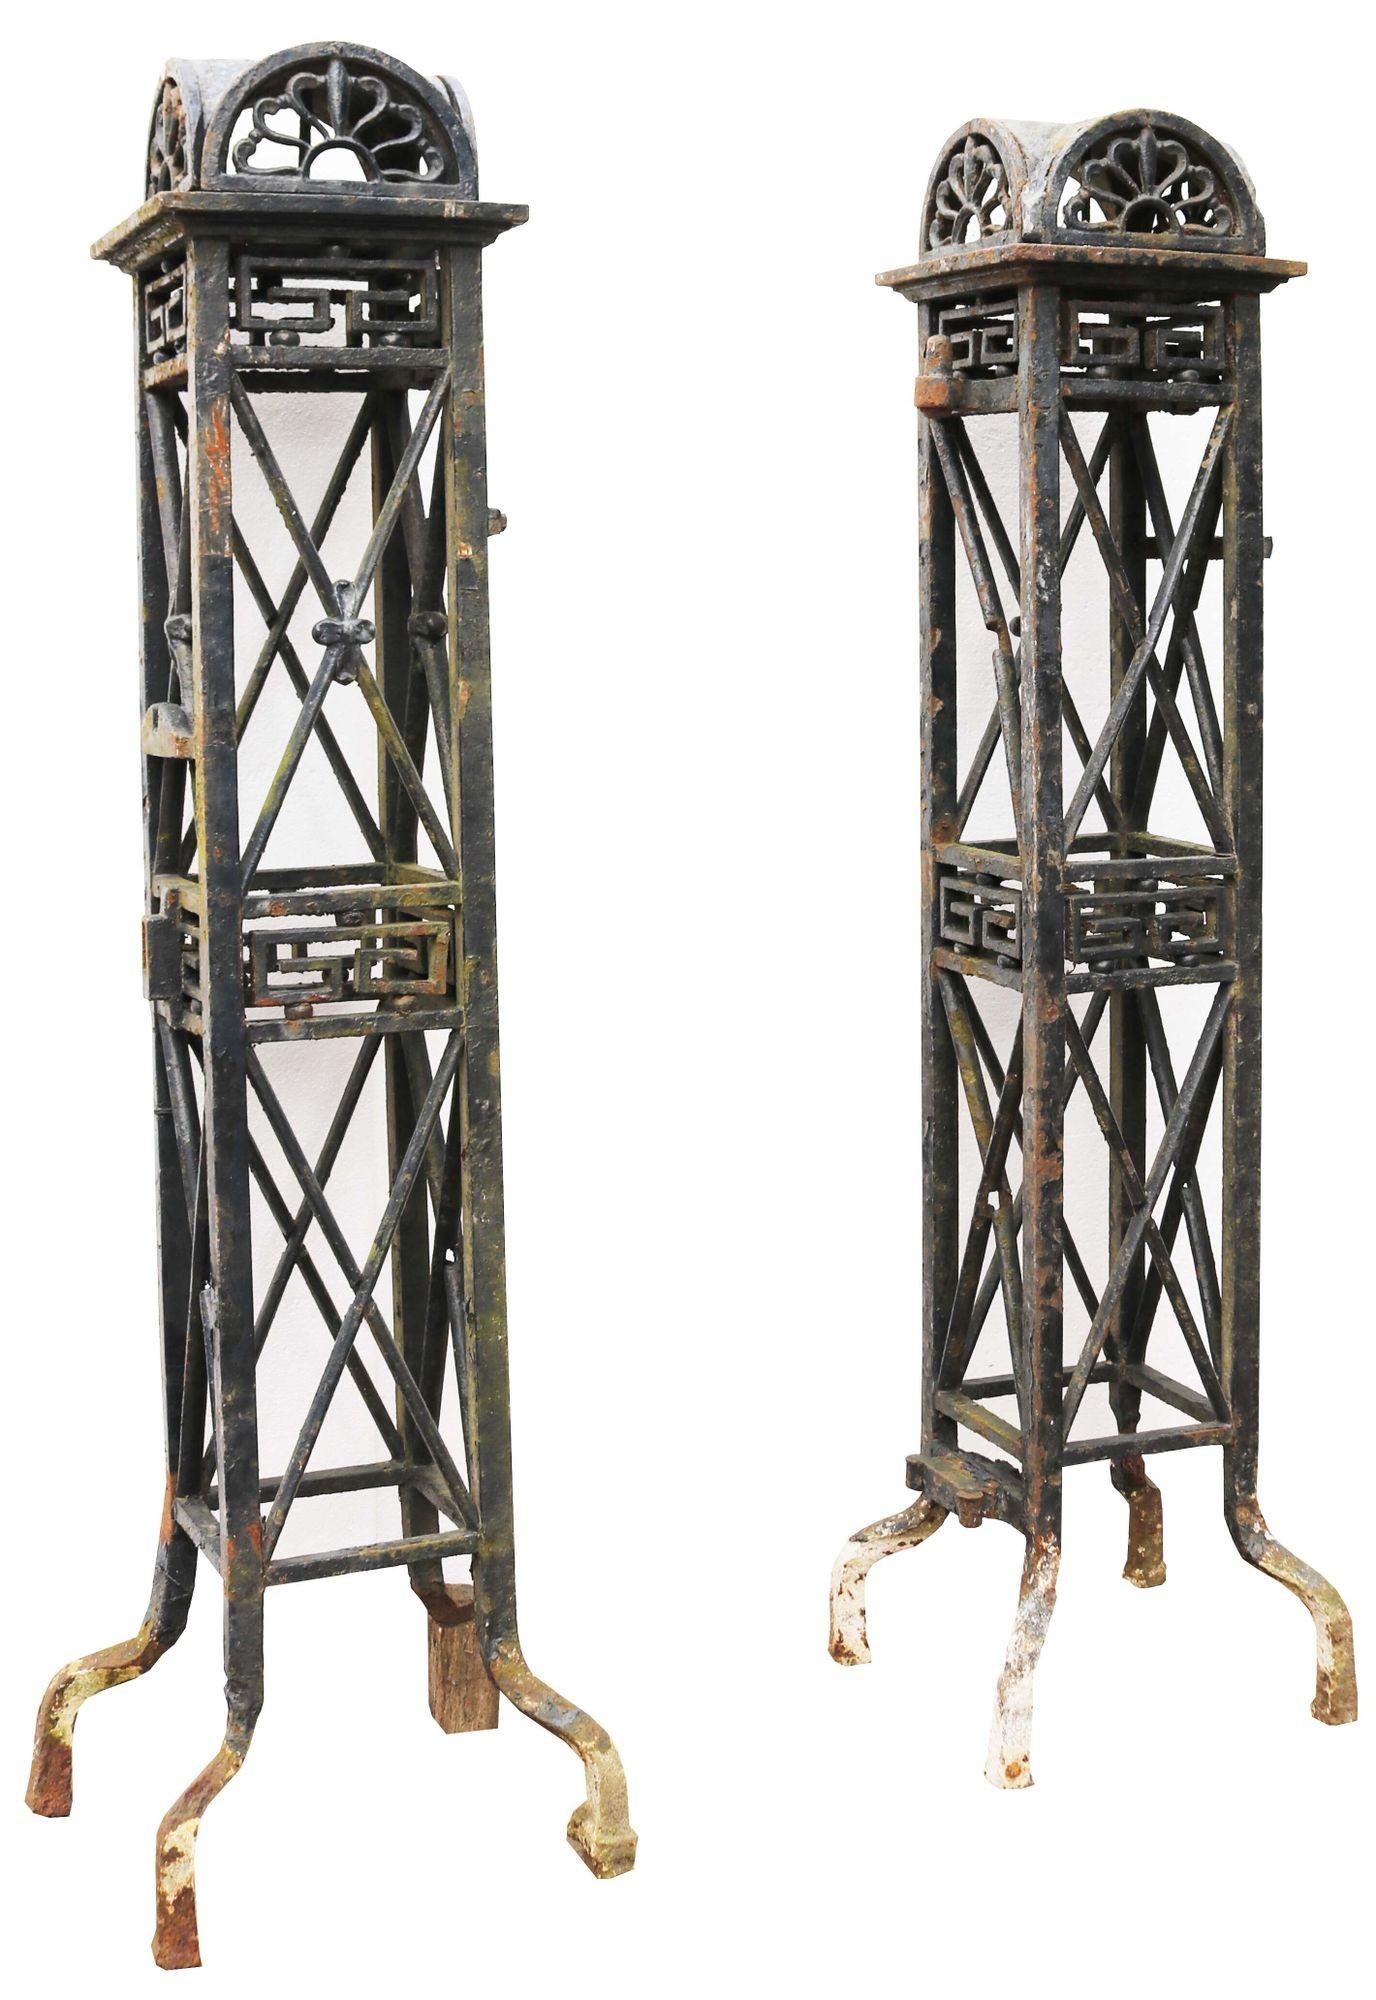 Pair of Georgian wrought iron gate posts. A set of tall, neoclassical style Georgian gate posts.